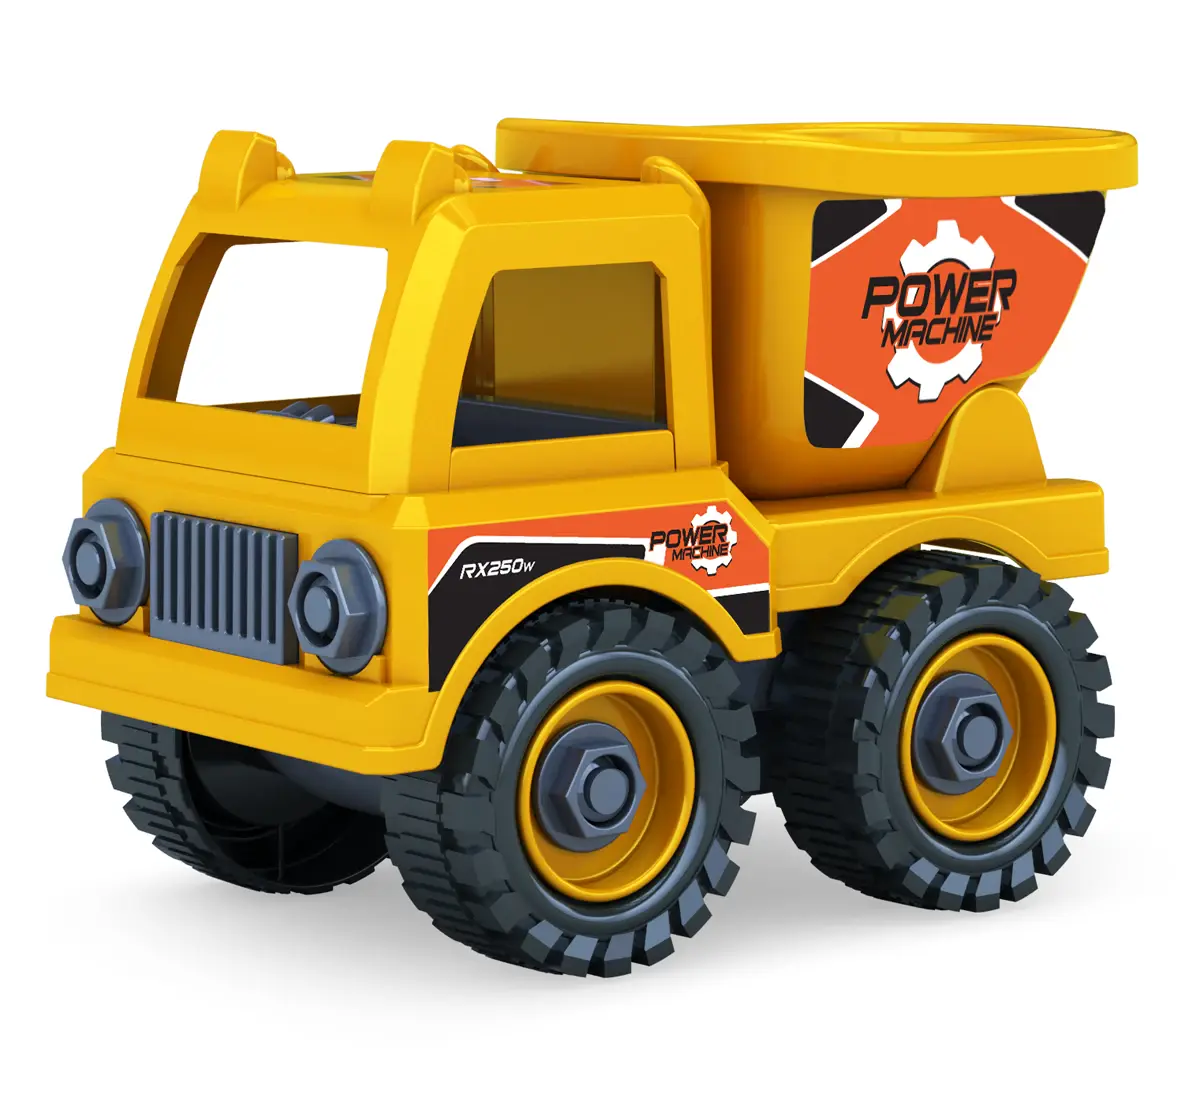 Mighty Machines Dump Truck Construction Vechile for kids 3Y+, Multicolour